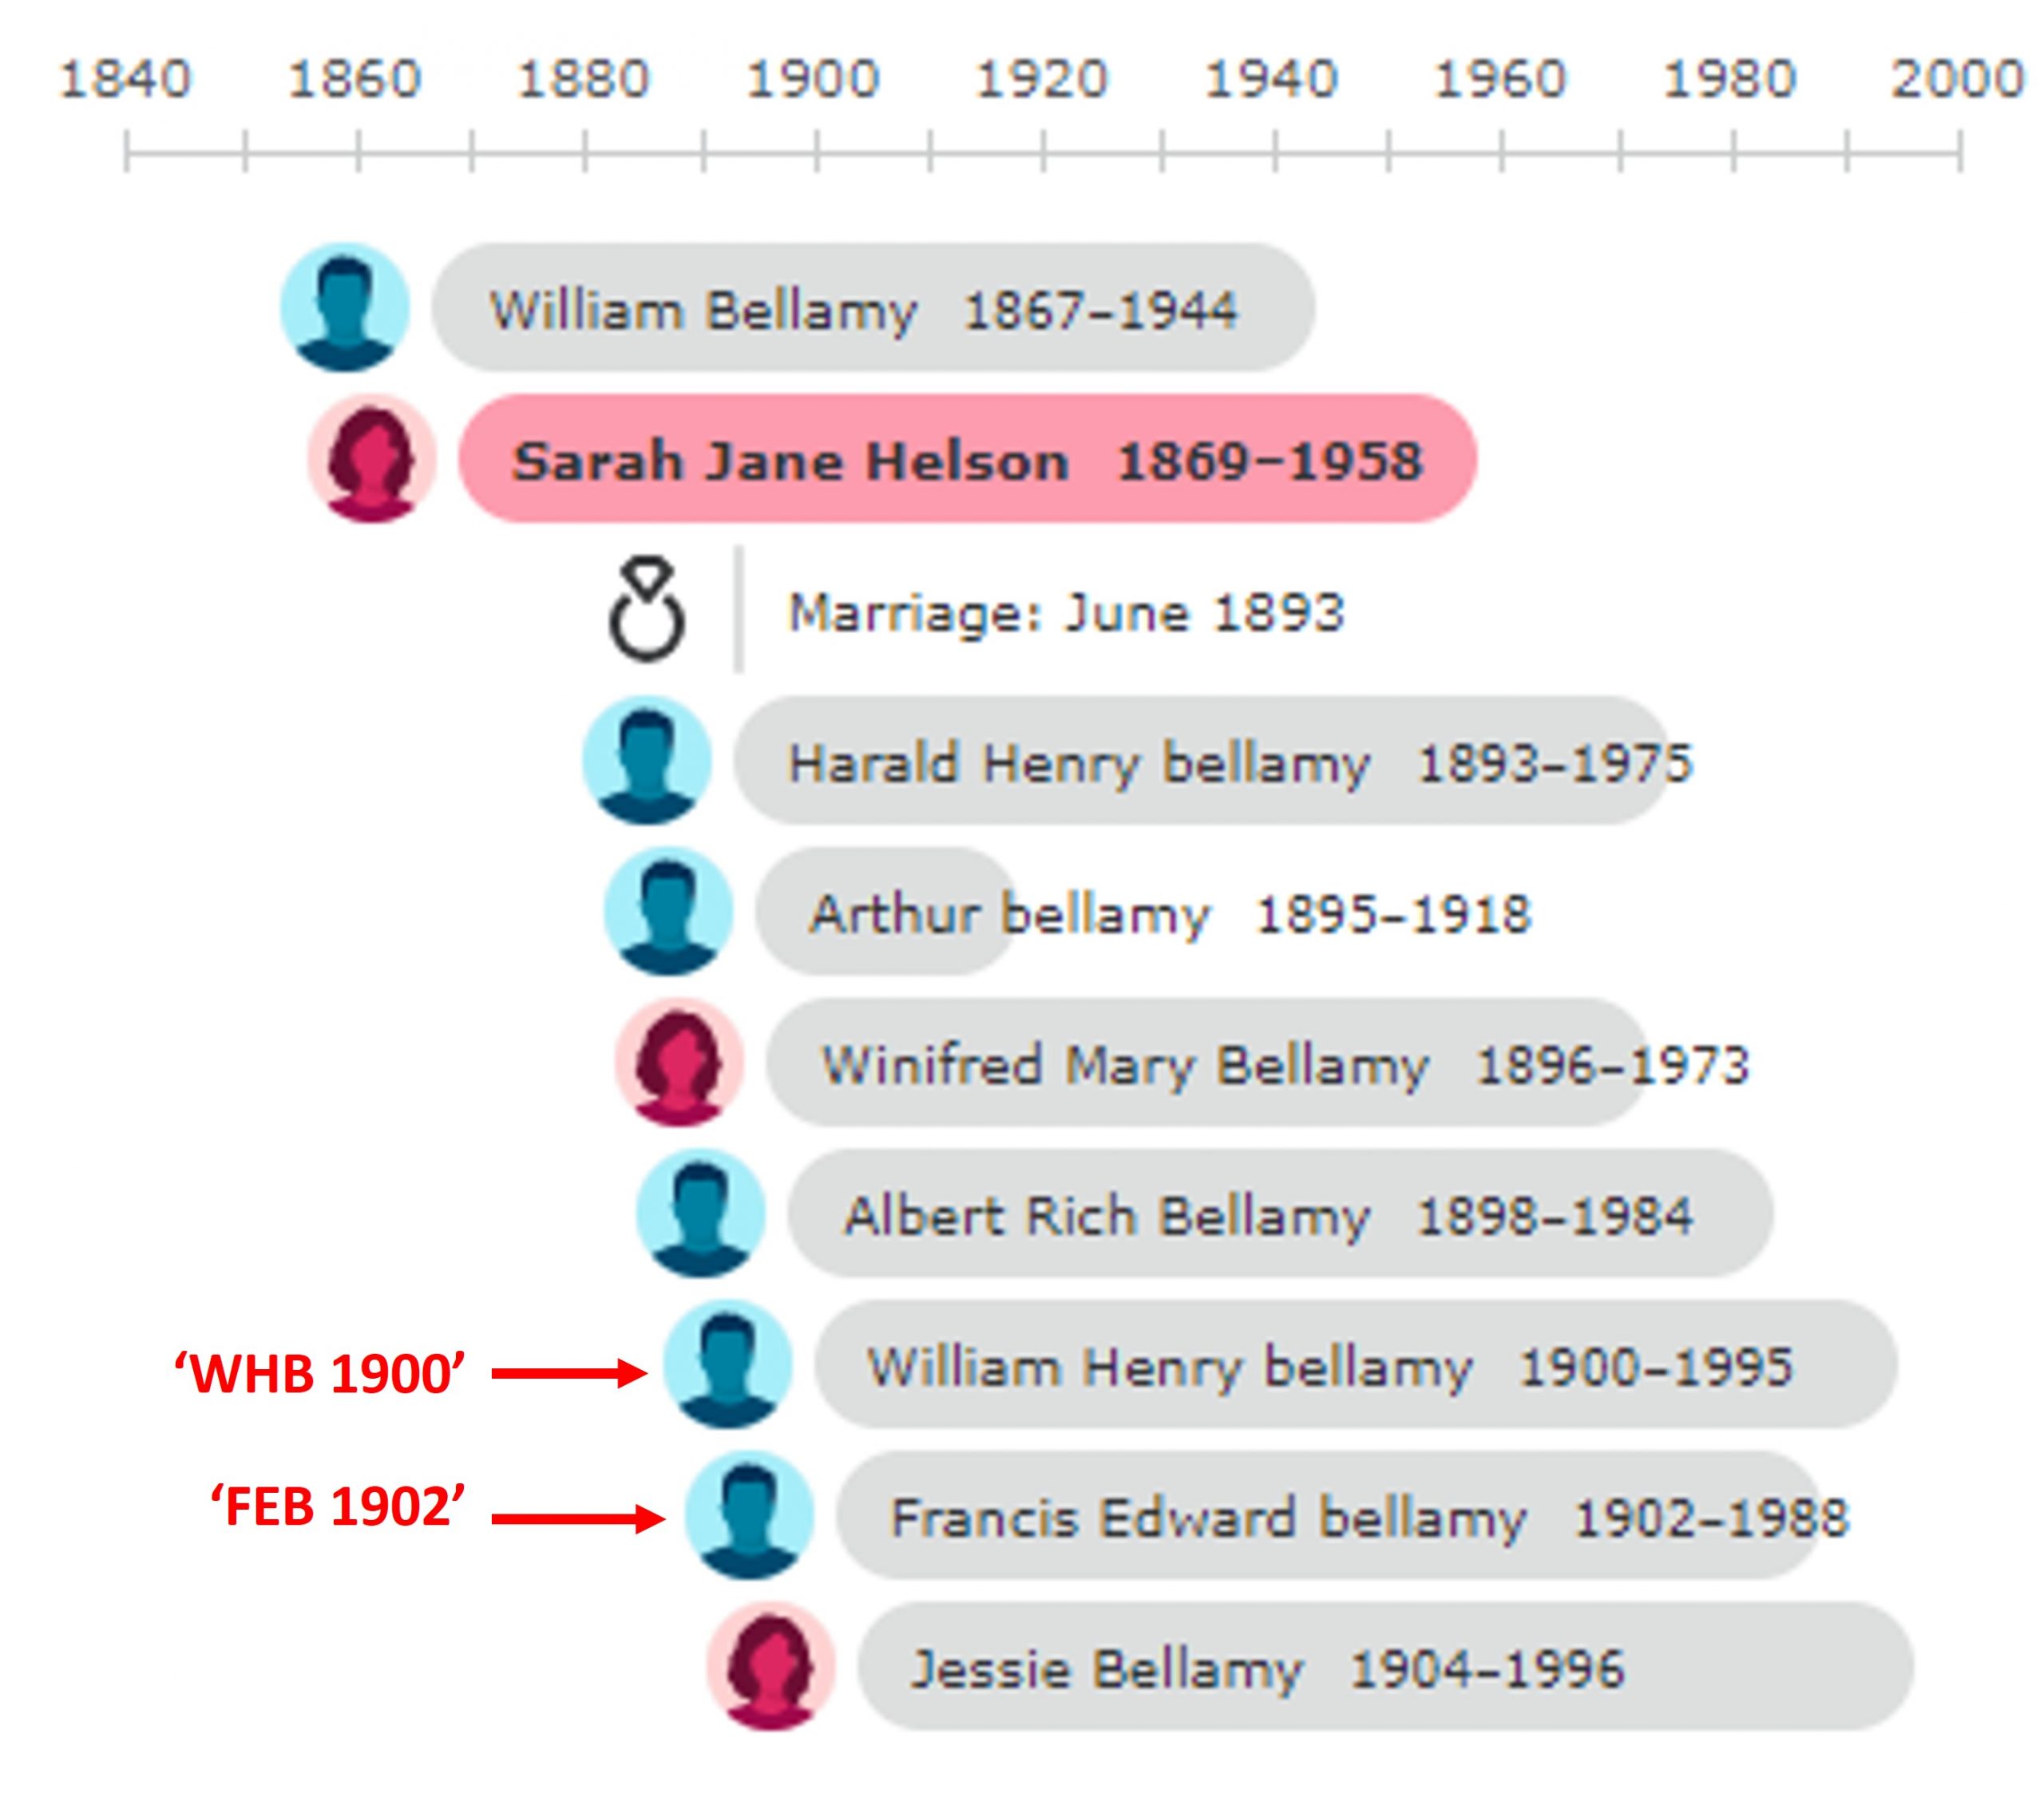 0. Timeline of Family